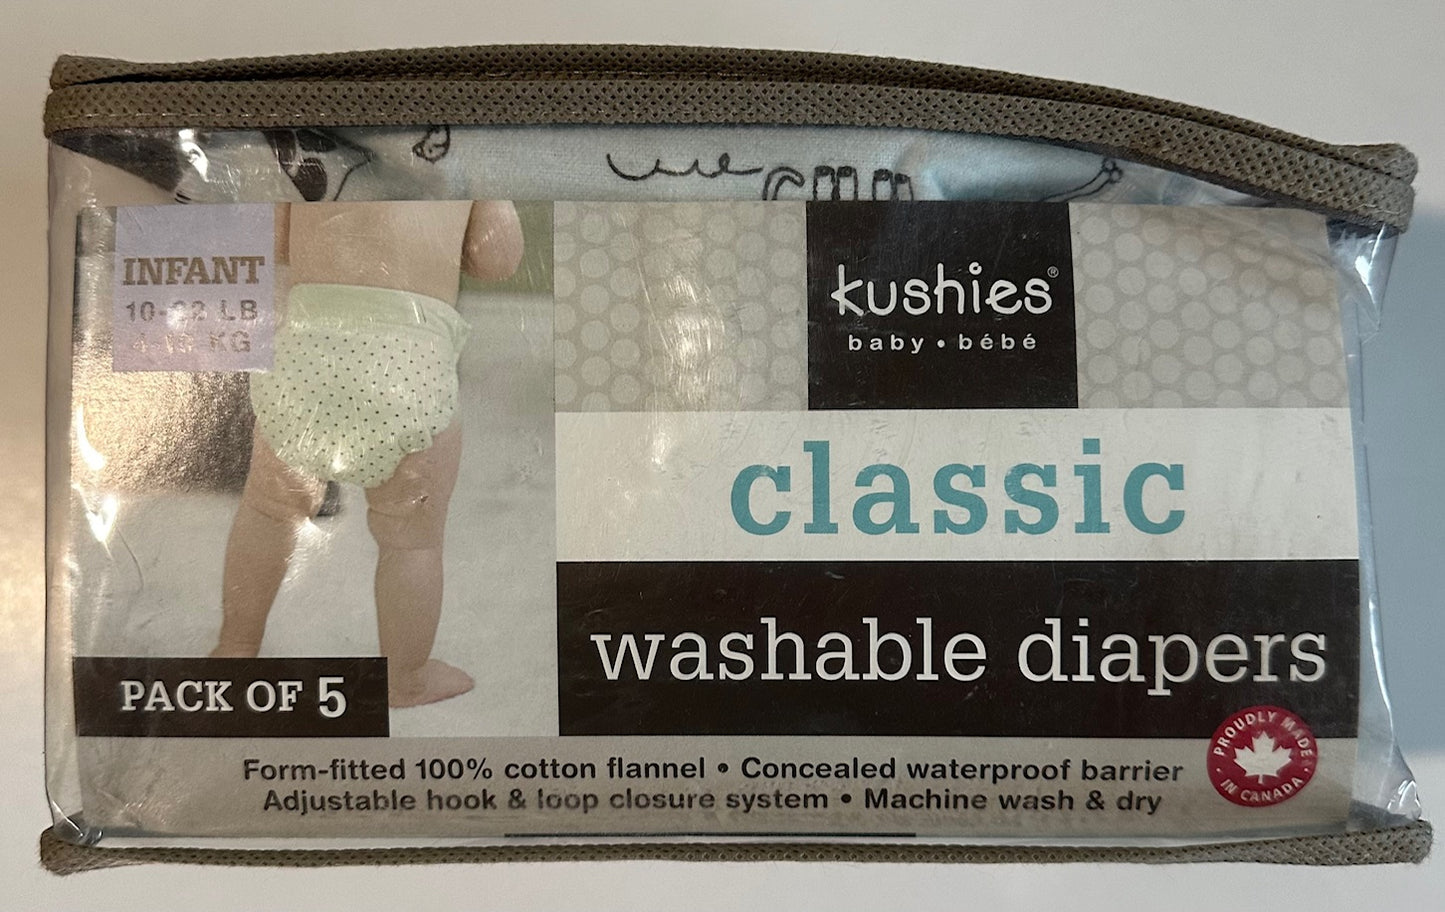 *New* Kushies, Pack of 5 Washable Diapers - 10-22 Lbs.